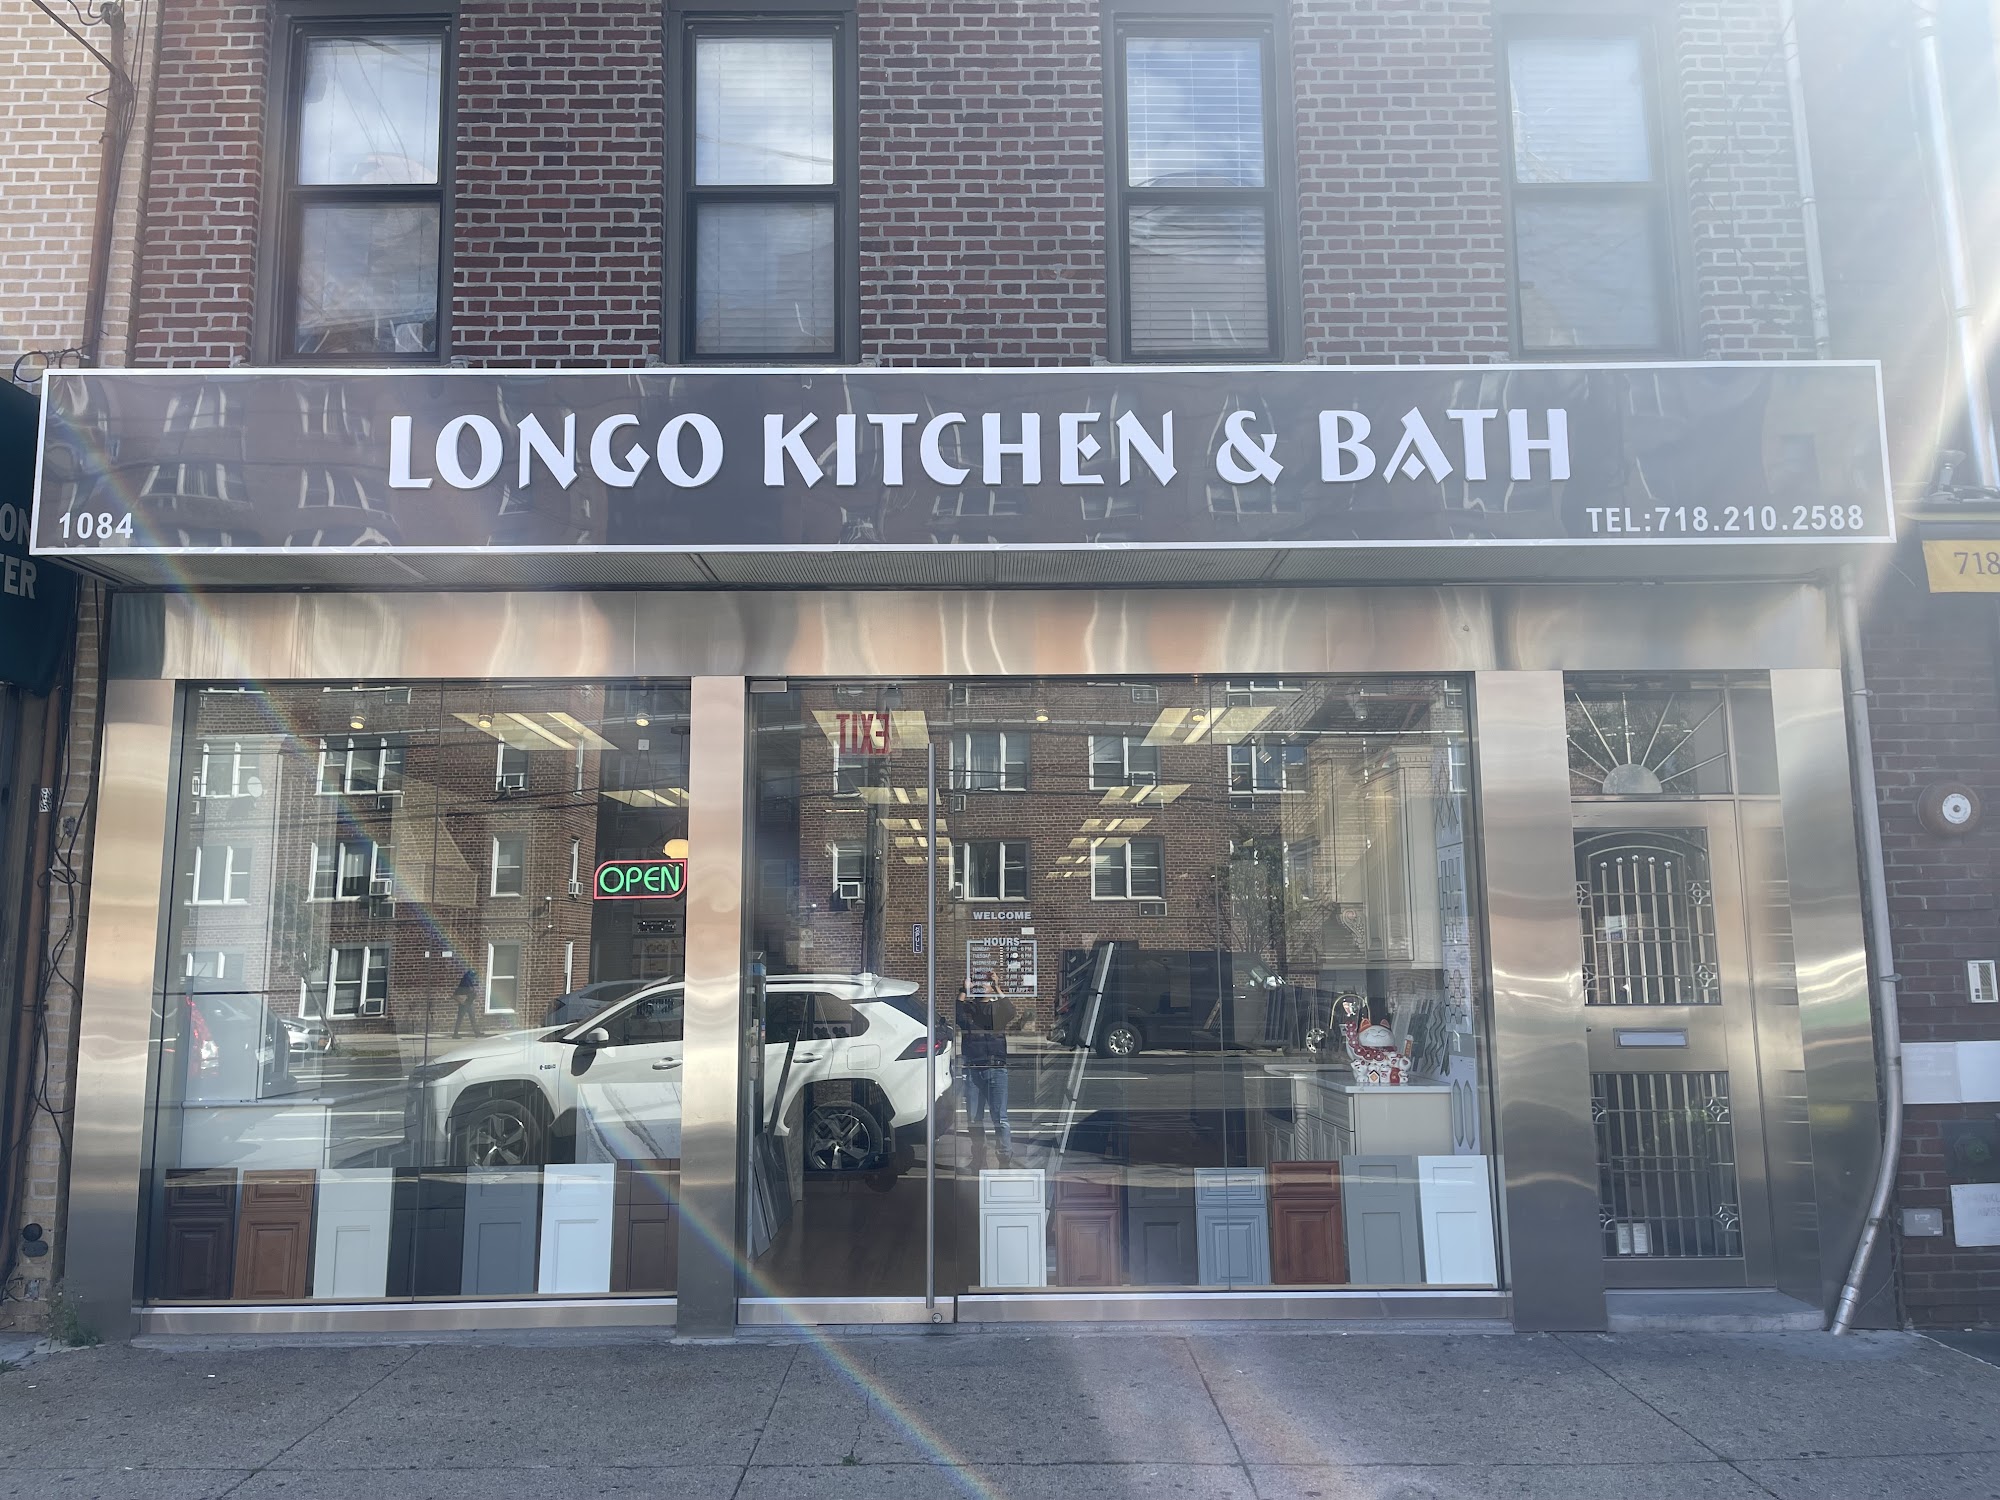 Longo Kitchen and Bath: Cabinet Store in Bronx, Best Kitchen and Bath Cabinets Shop